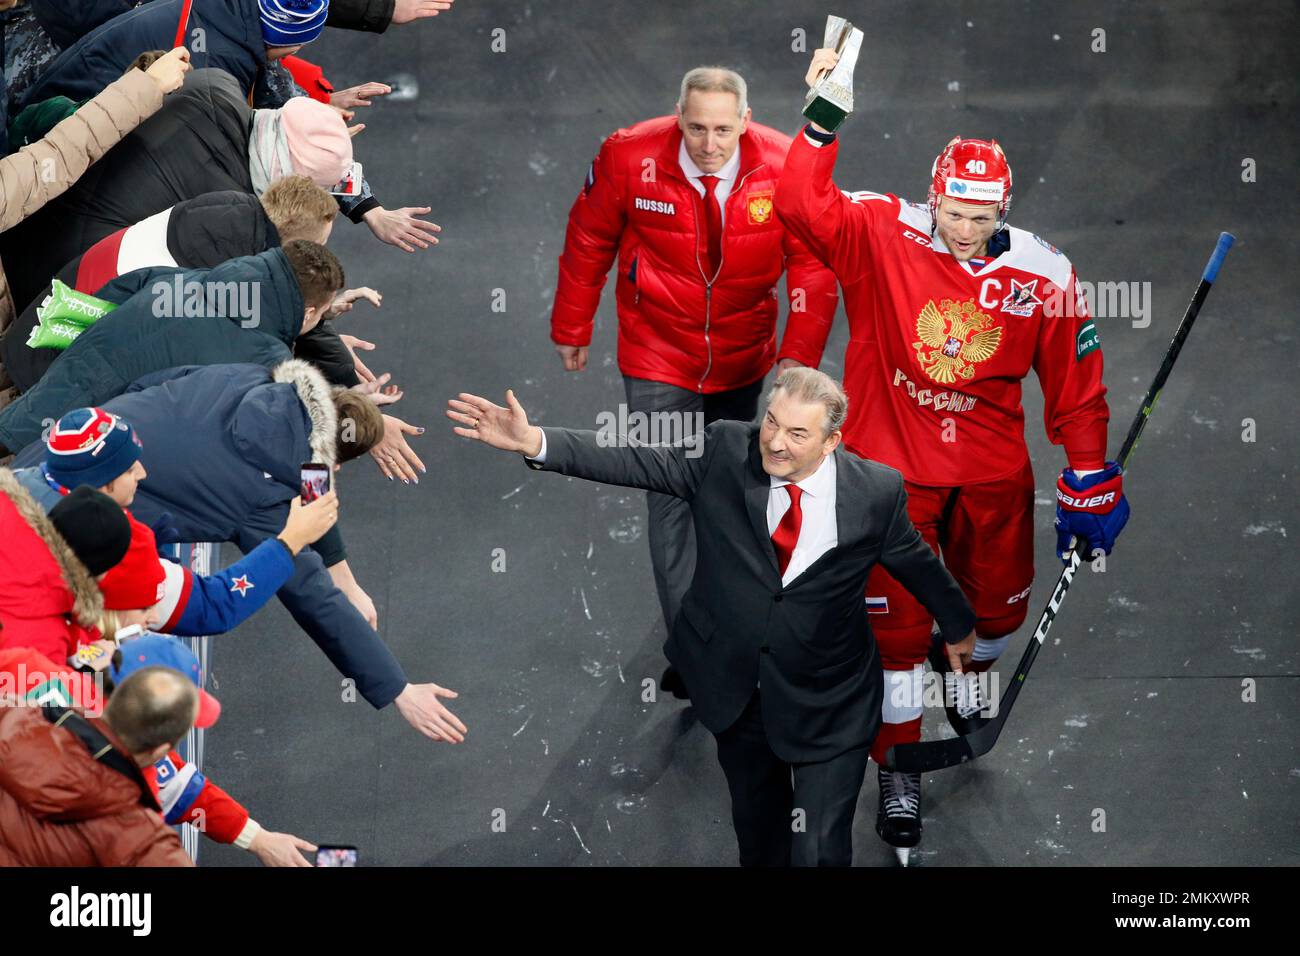 Russian Ice Hockey Federation president Vladislav Tretyak, front, followed by Russias Evgeny Ketov holding the Channel One Cup trophy, as they leave the rink after the Channel One Cup ice hockey match